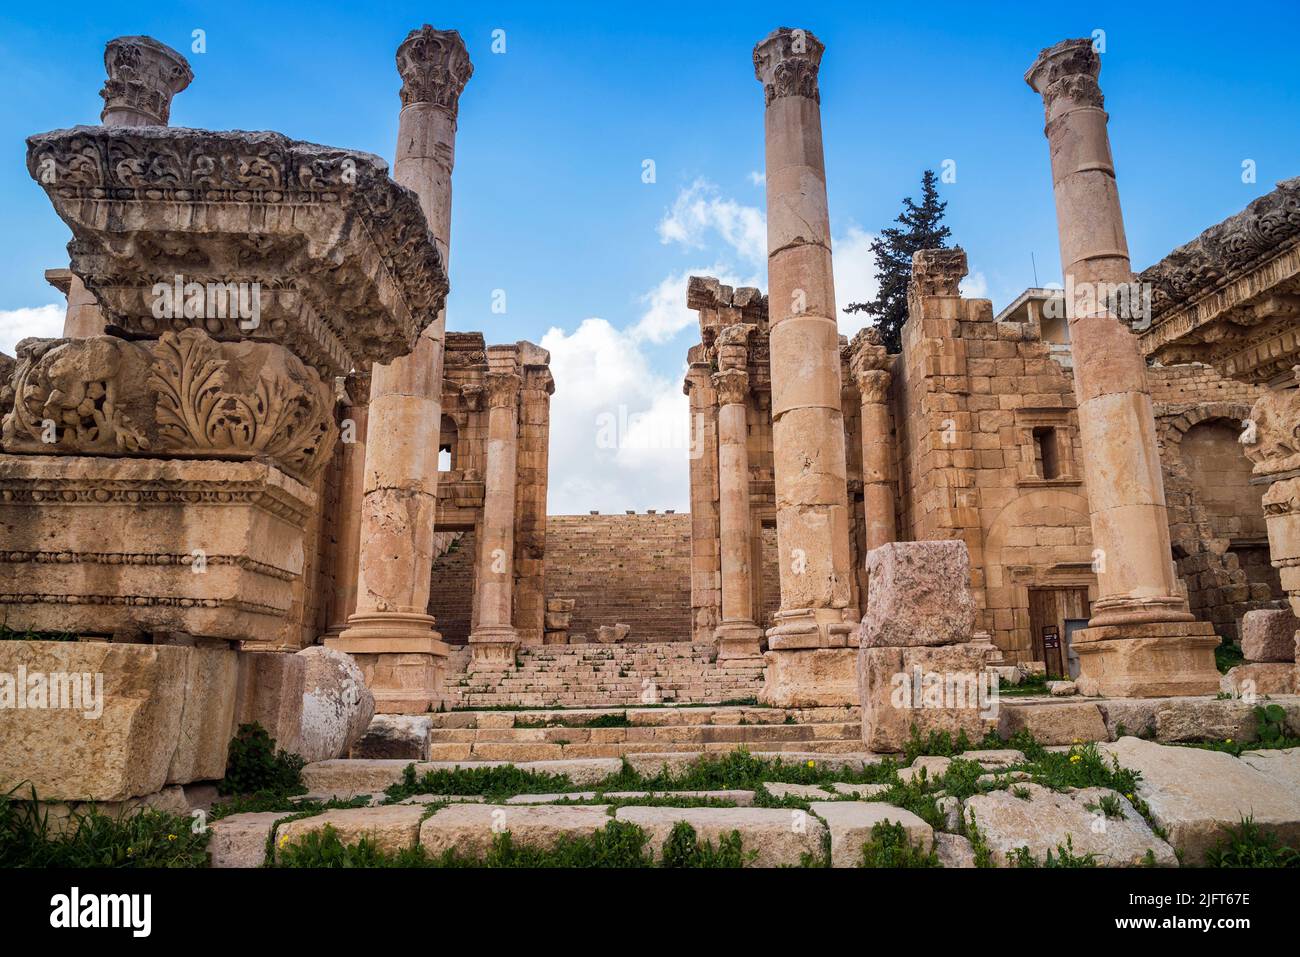 Columns with decorative ornaments in the ancient roman city ruins of Jerash, Gerasa Governorate, Jordan Stock Photo